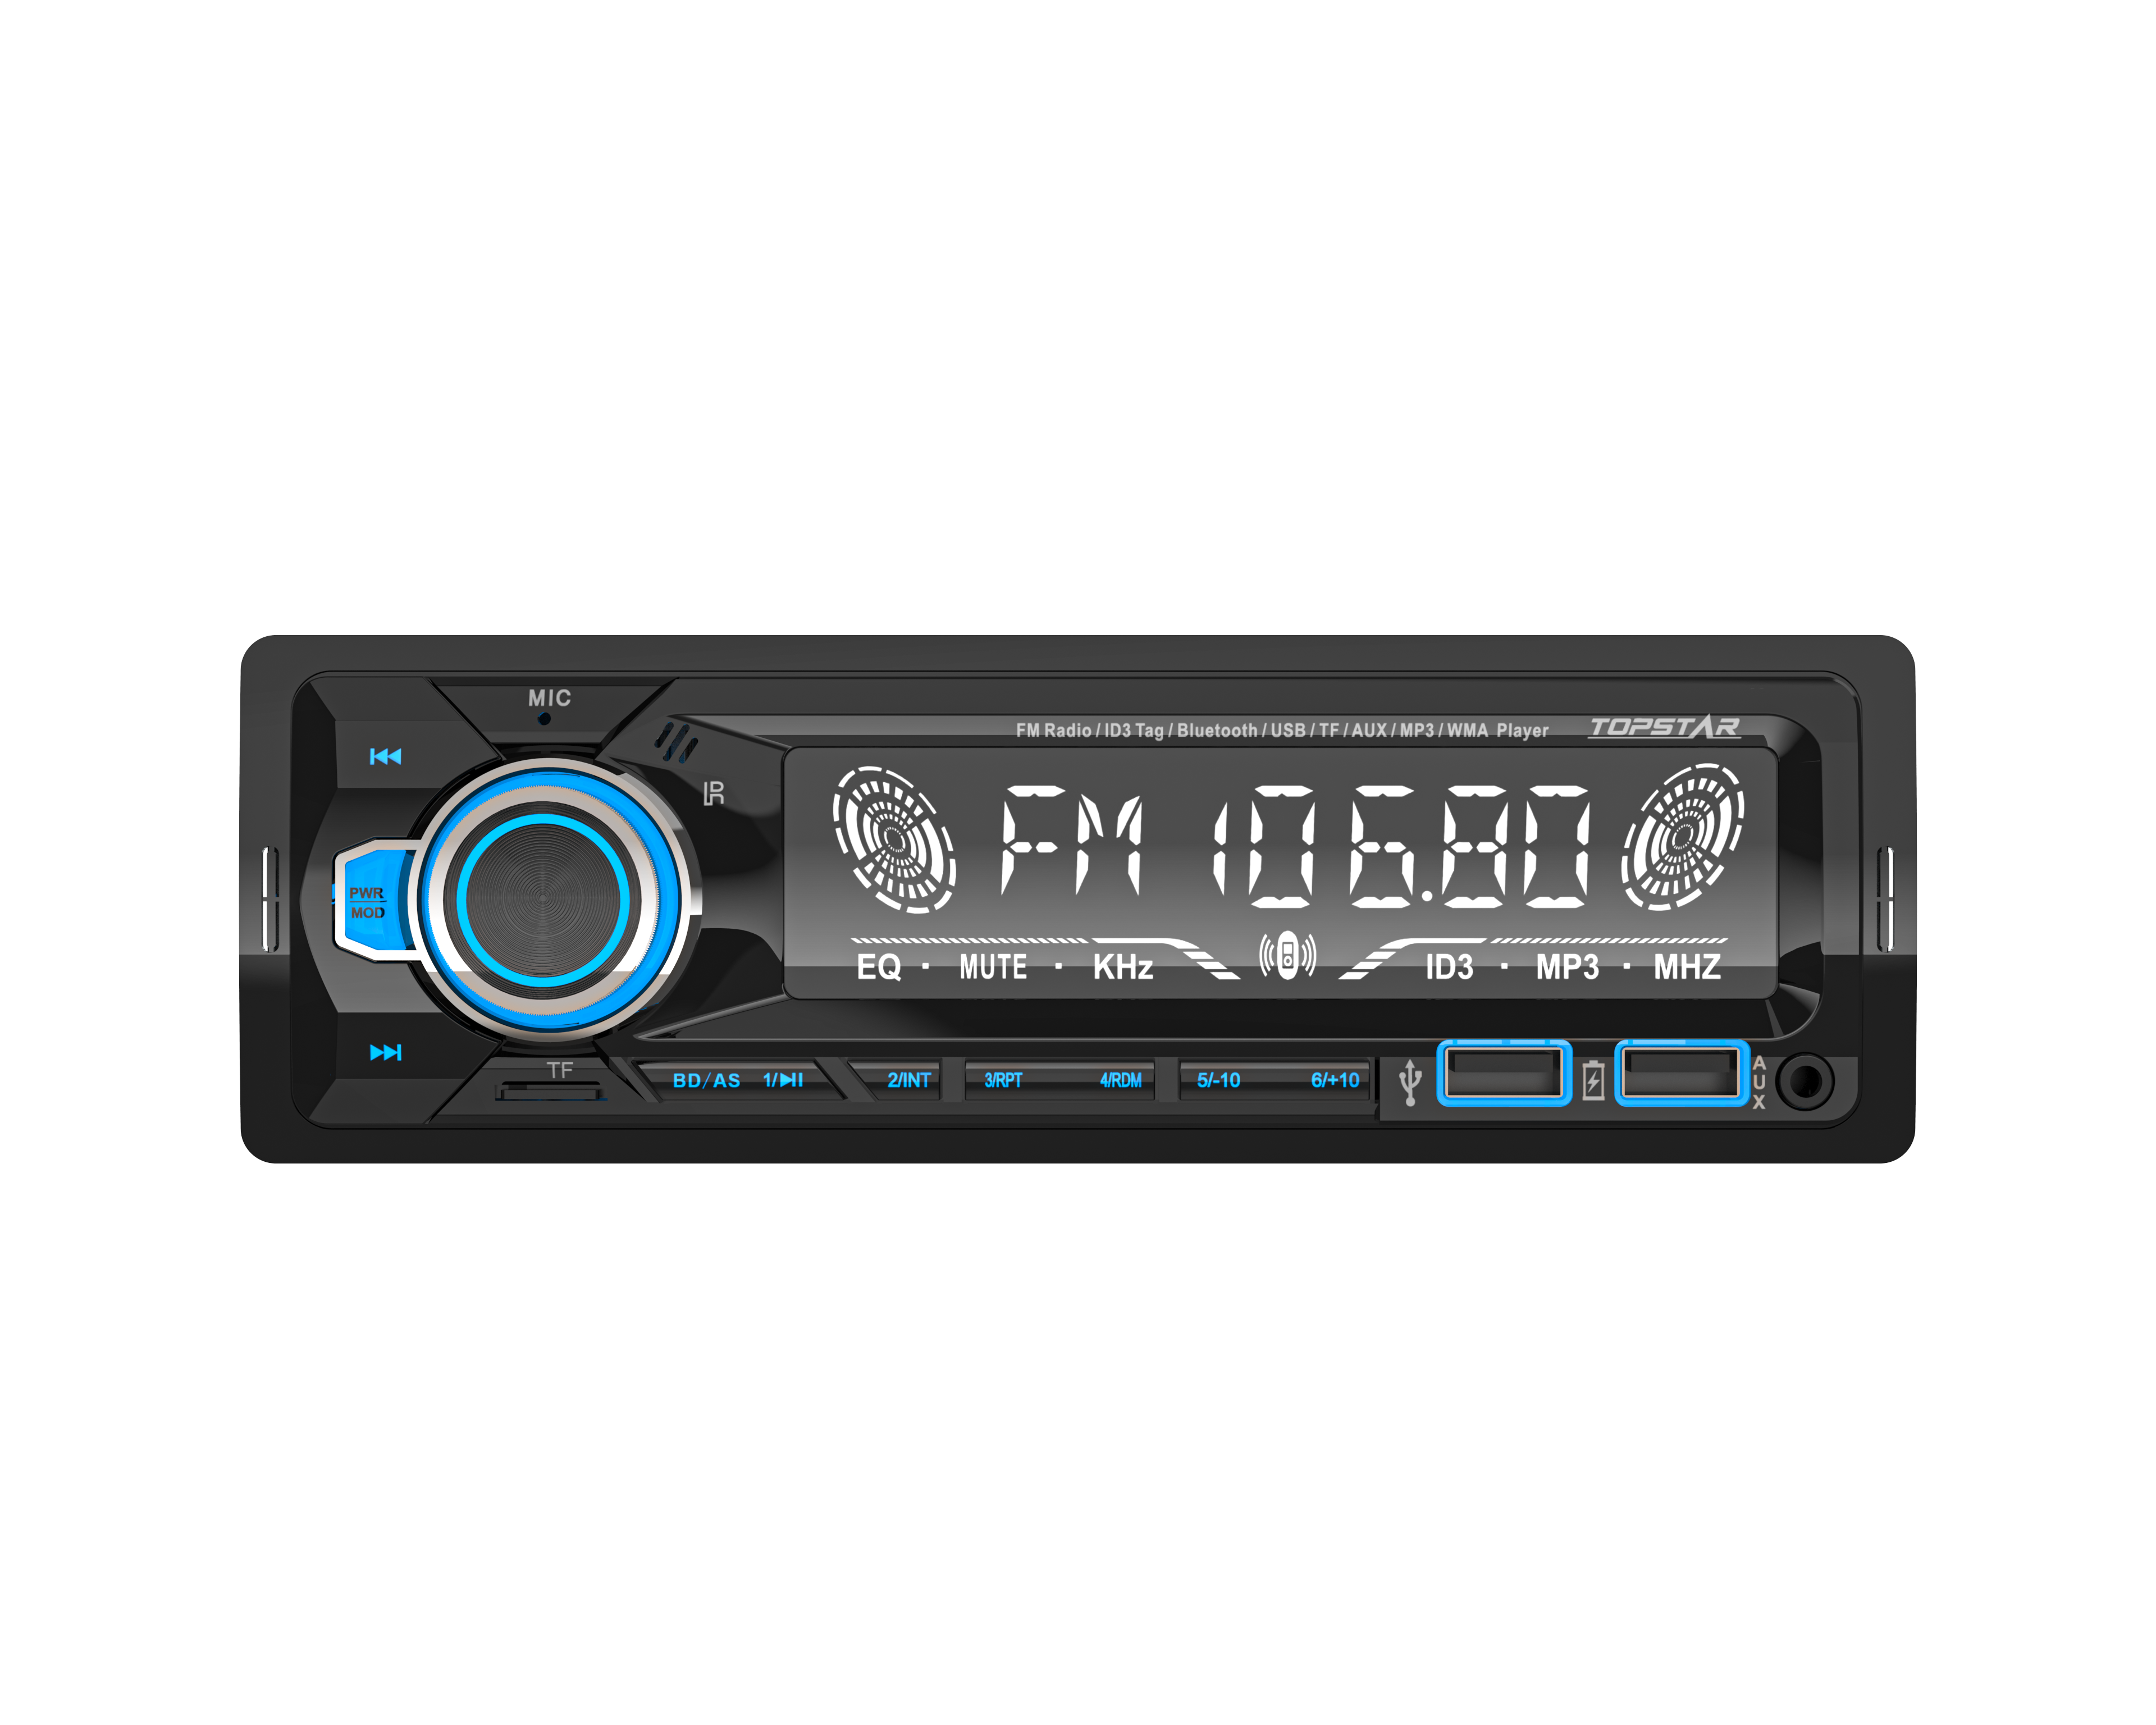 One Din Car Audio Bluetooth with LCD Display